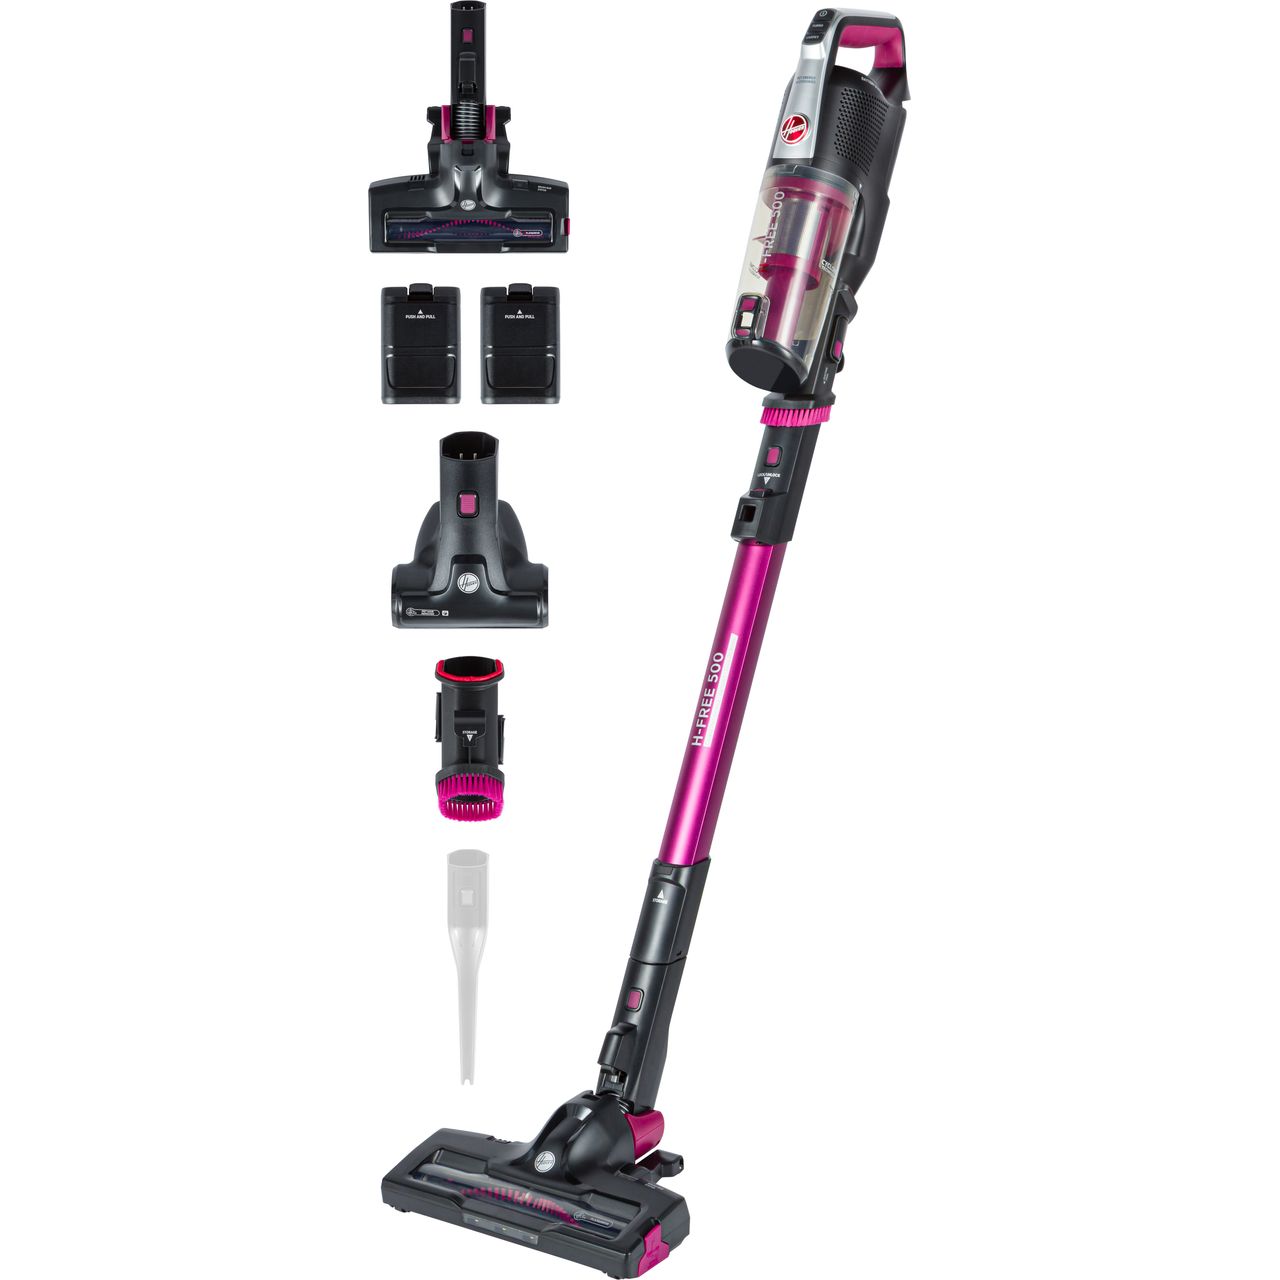 Hoover H-FREE 500 PETS ENERGY HF522PTE Cordless Vacuum Cleaner with Pet Hair Removal and up to 40 Minutes Run Time Review